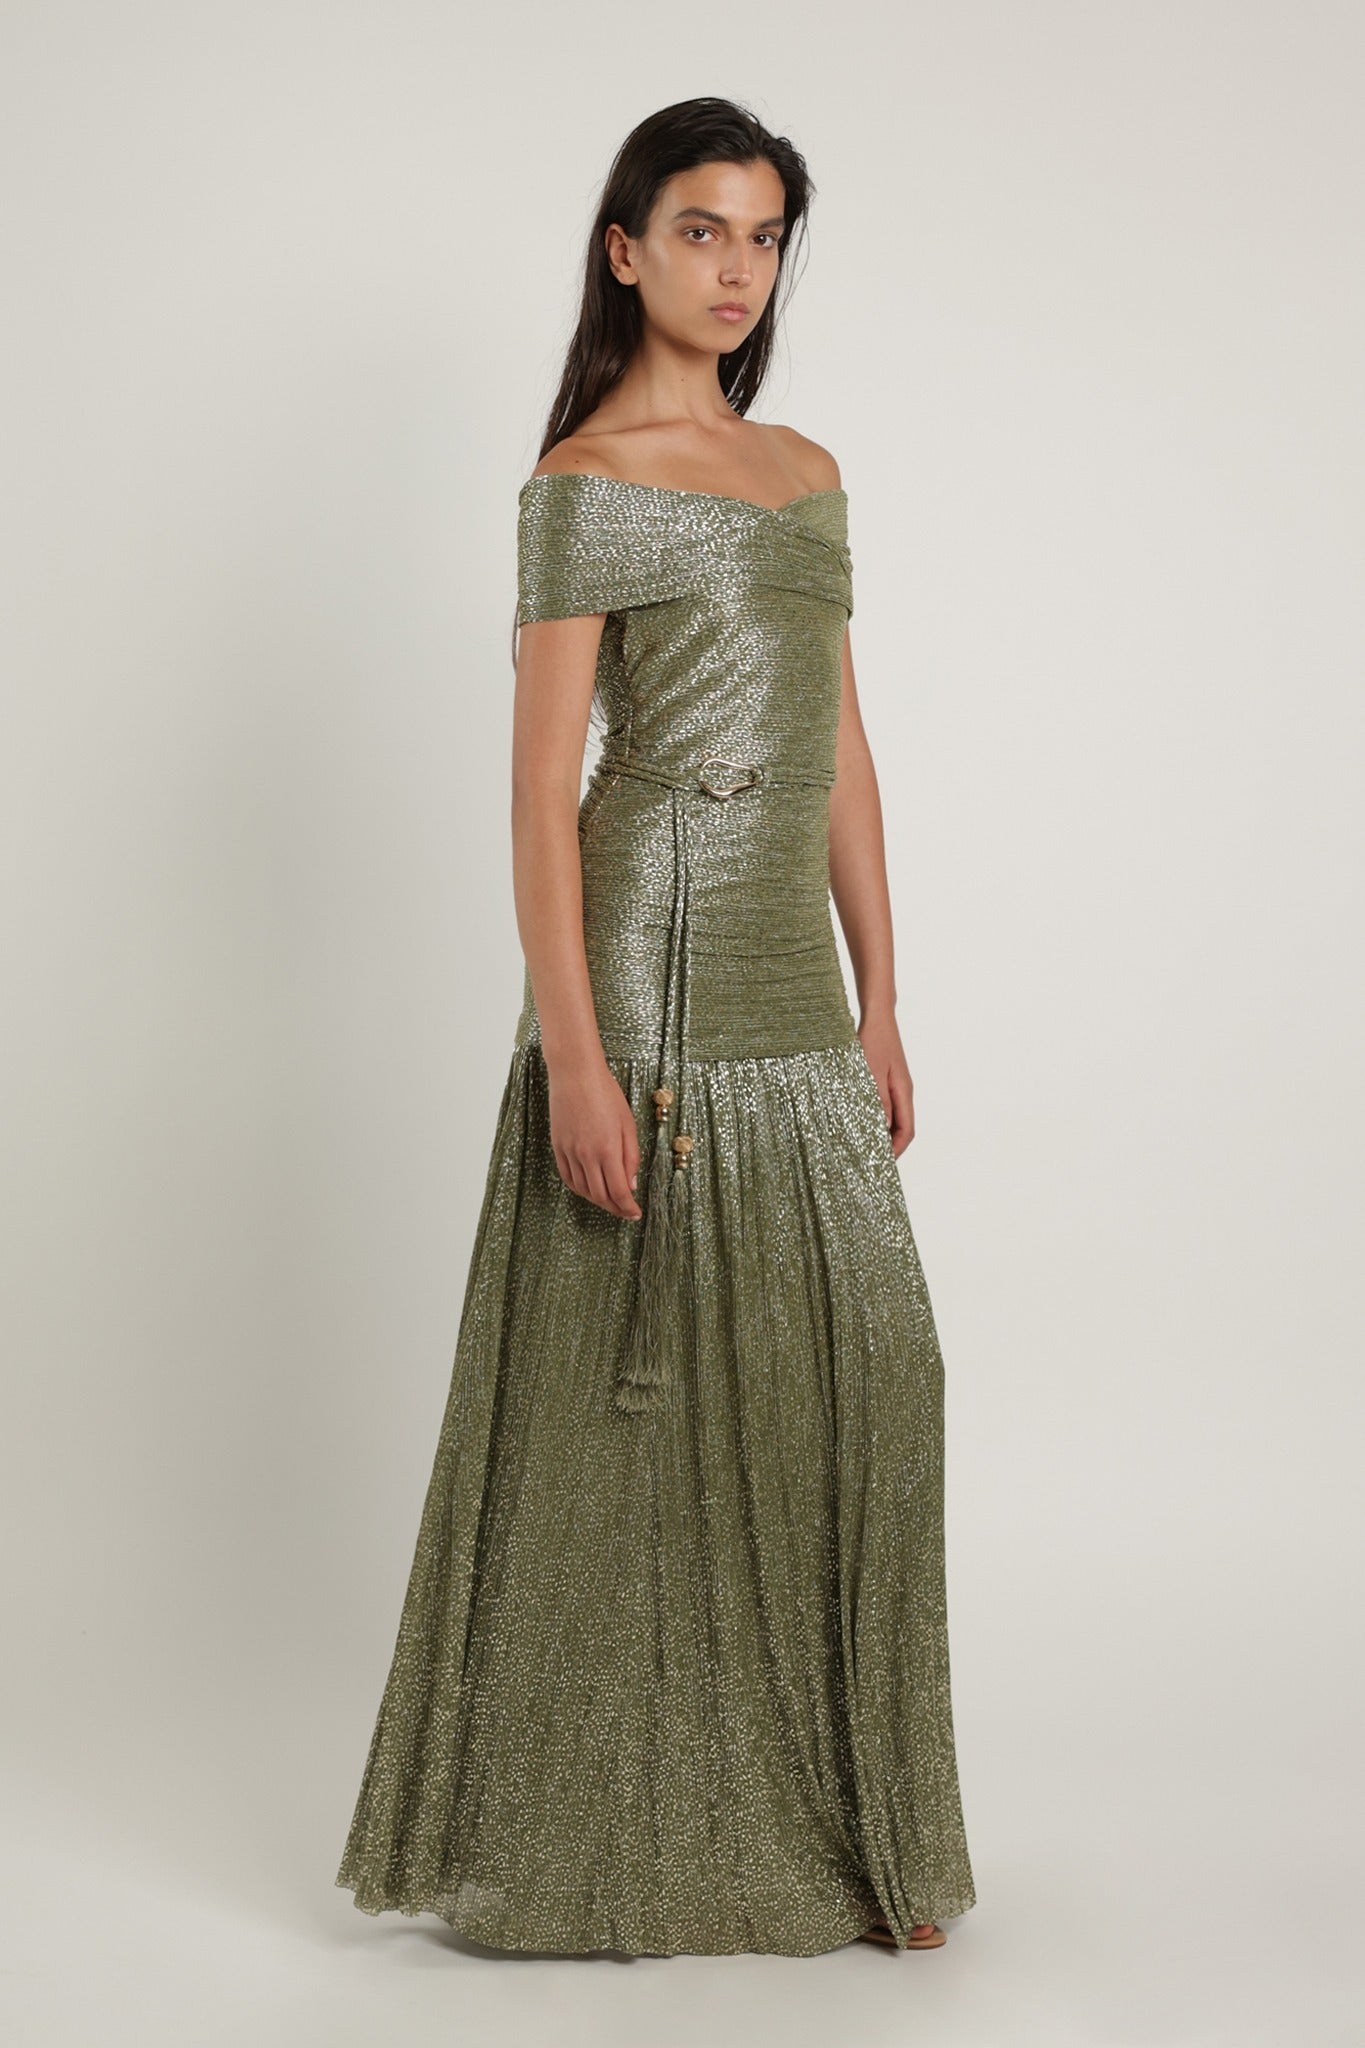 SABINA MUSAYEV - pleated_knit_w_speckled_foil_olive_green_summer_24